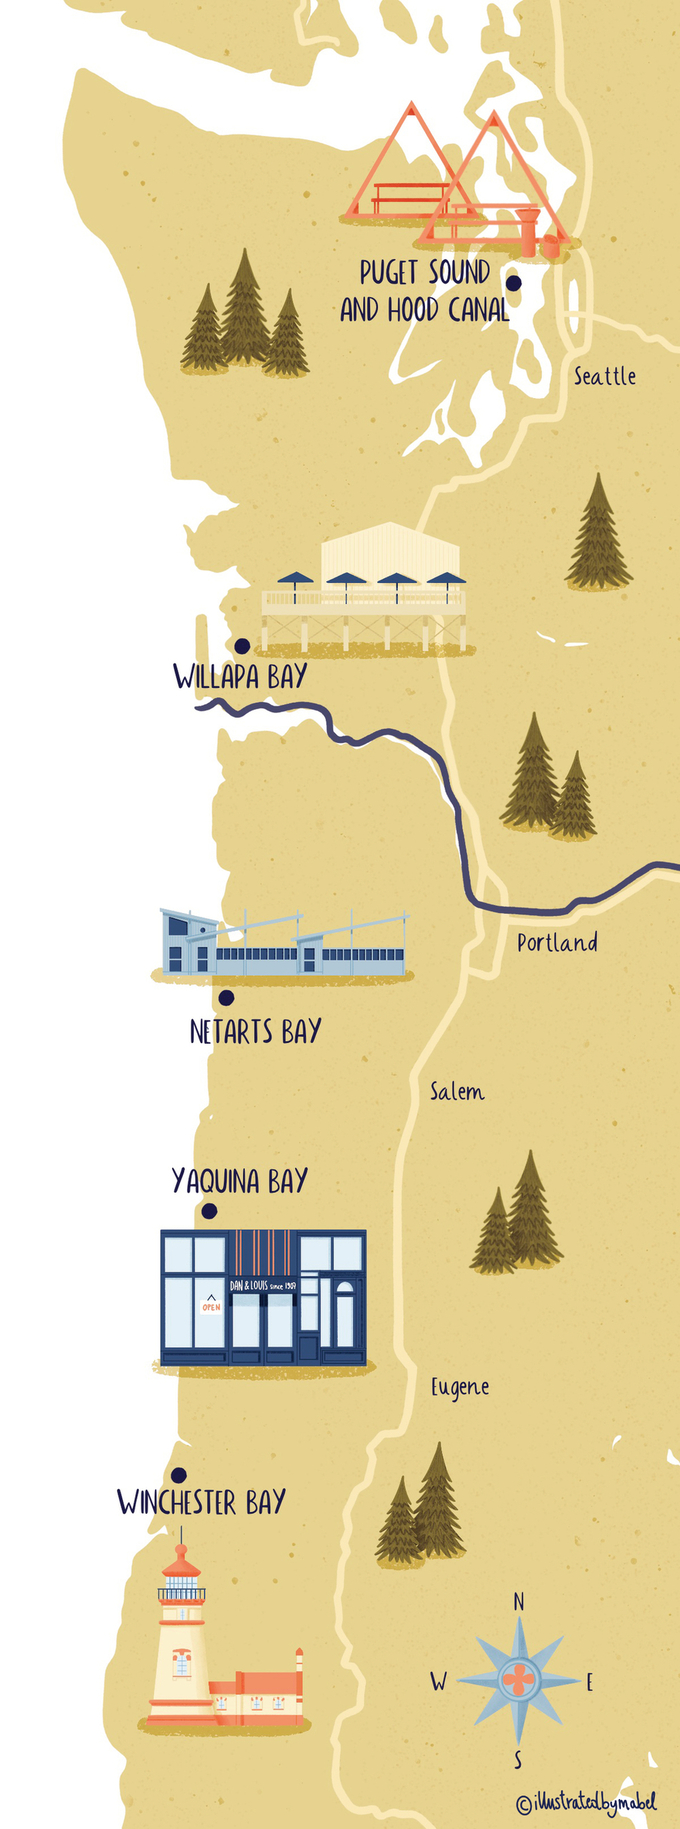 Pacific northwest illustrated map